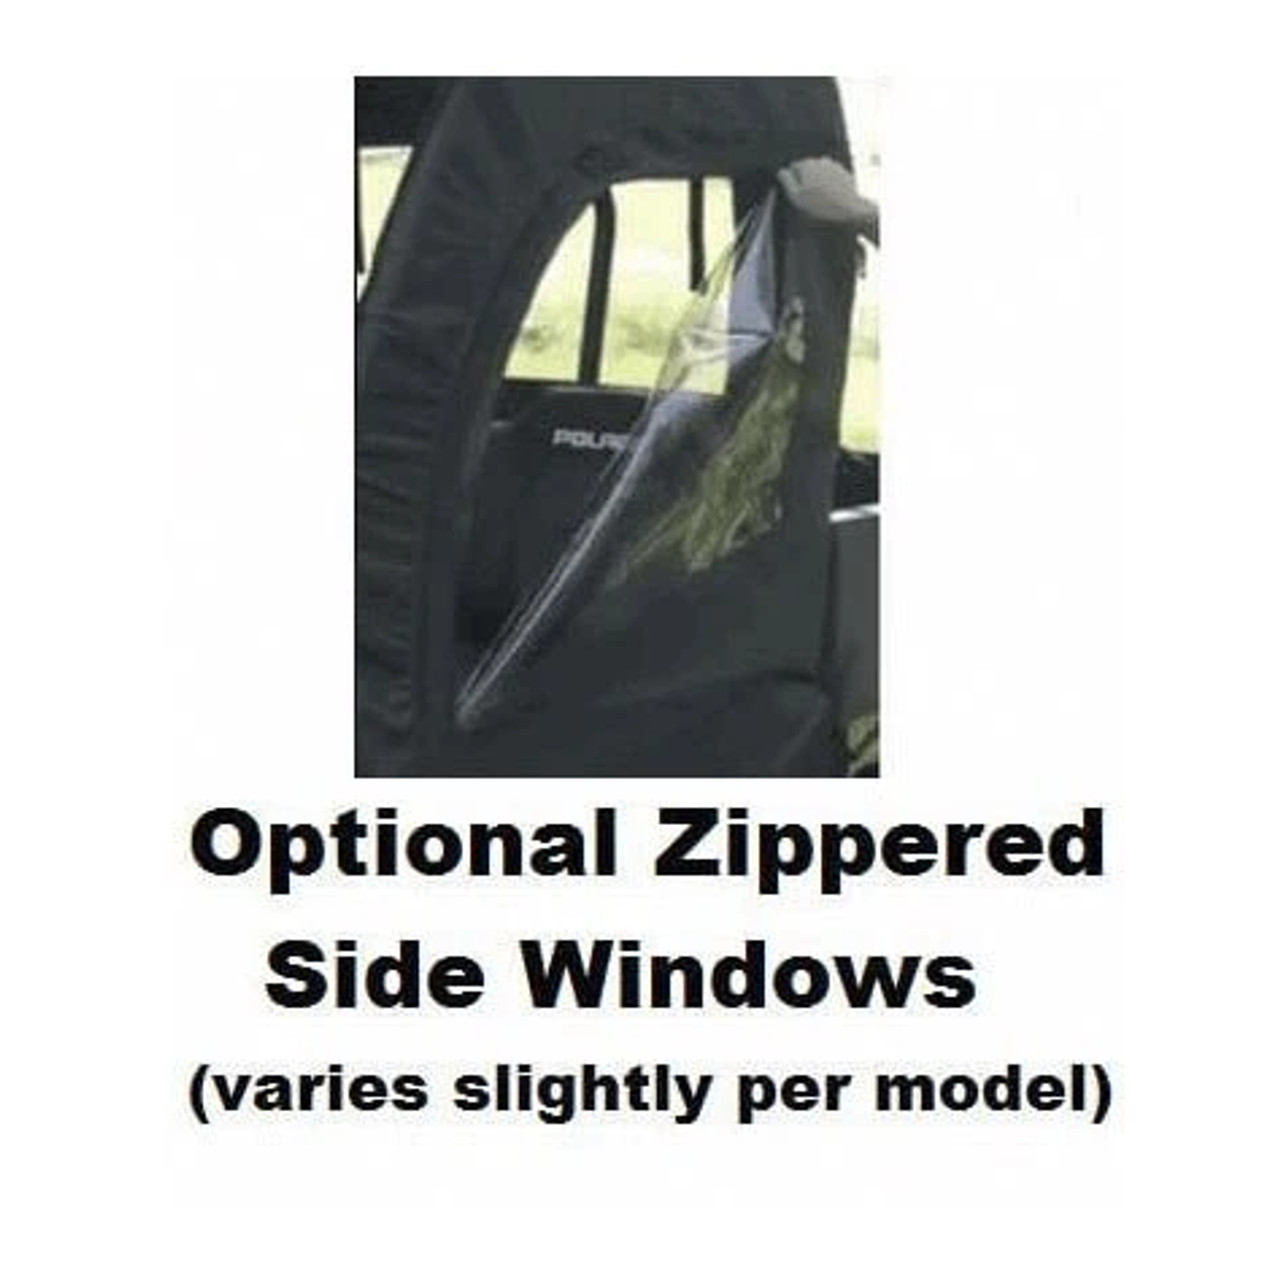 Kymco 450 - Full Cab Enclosure for Hard Windshield